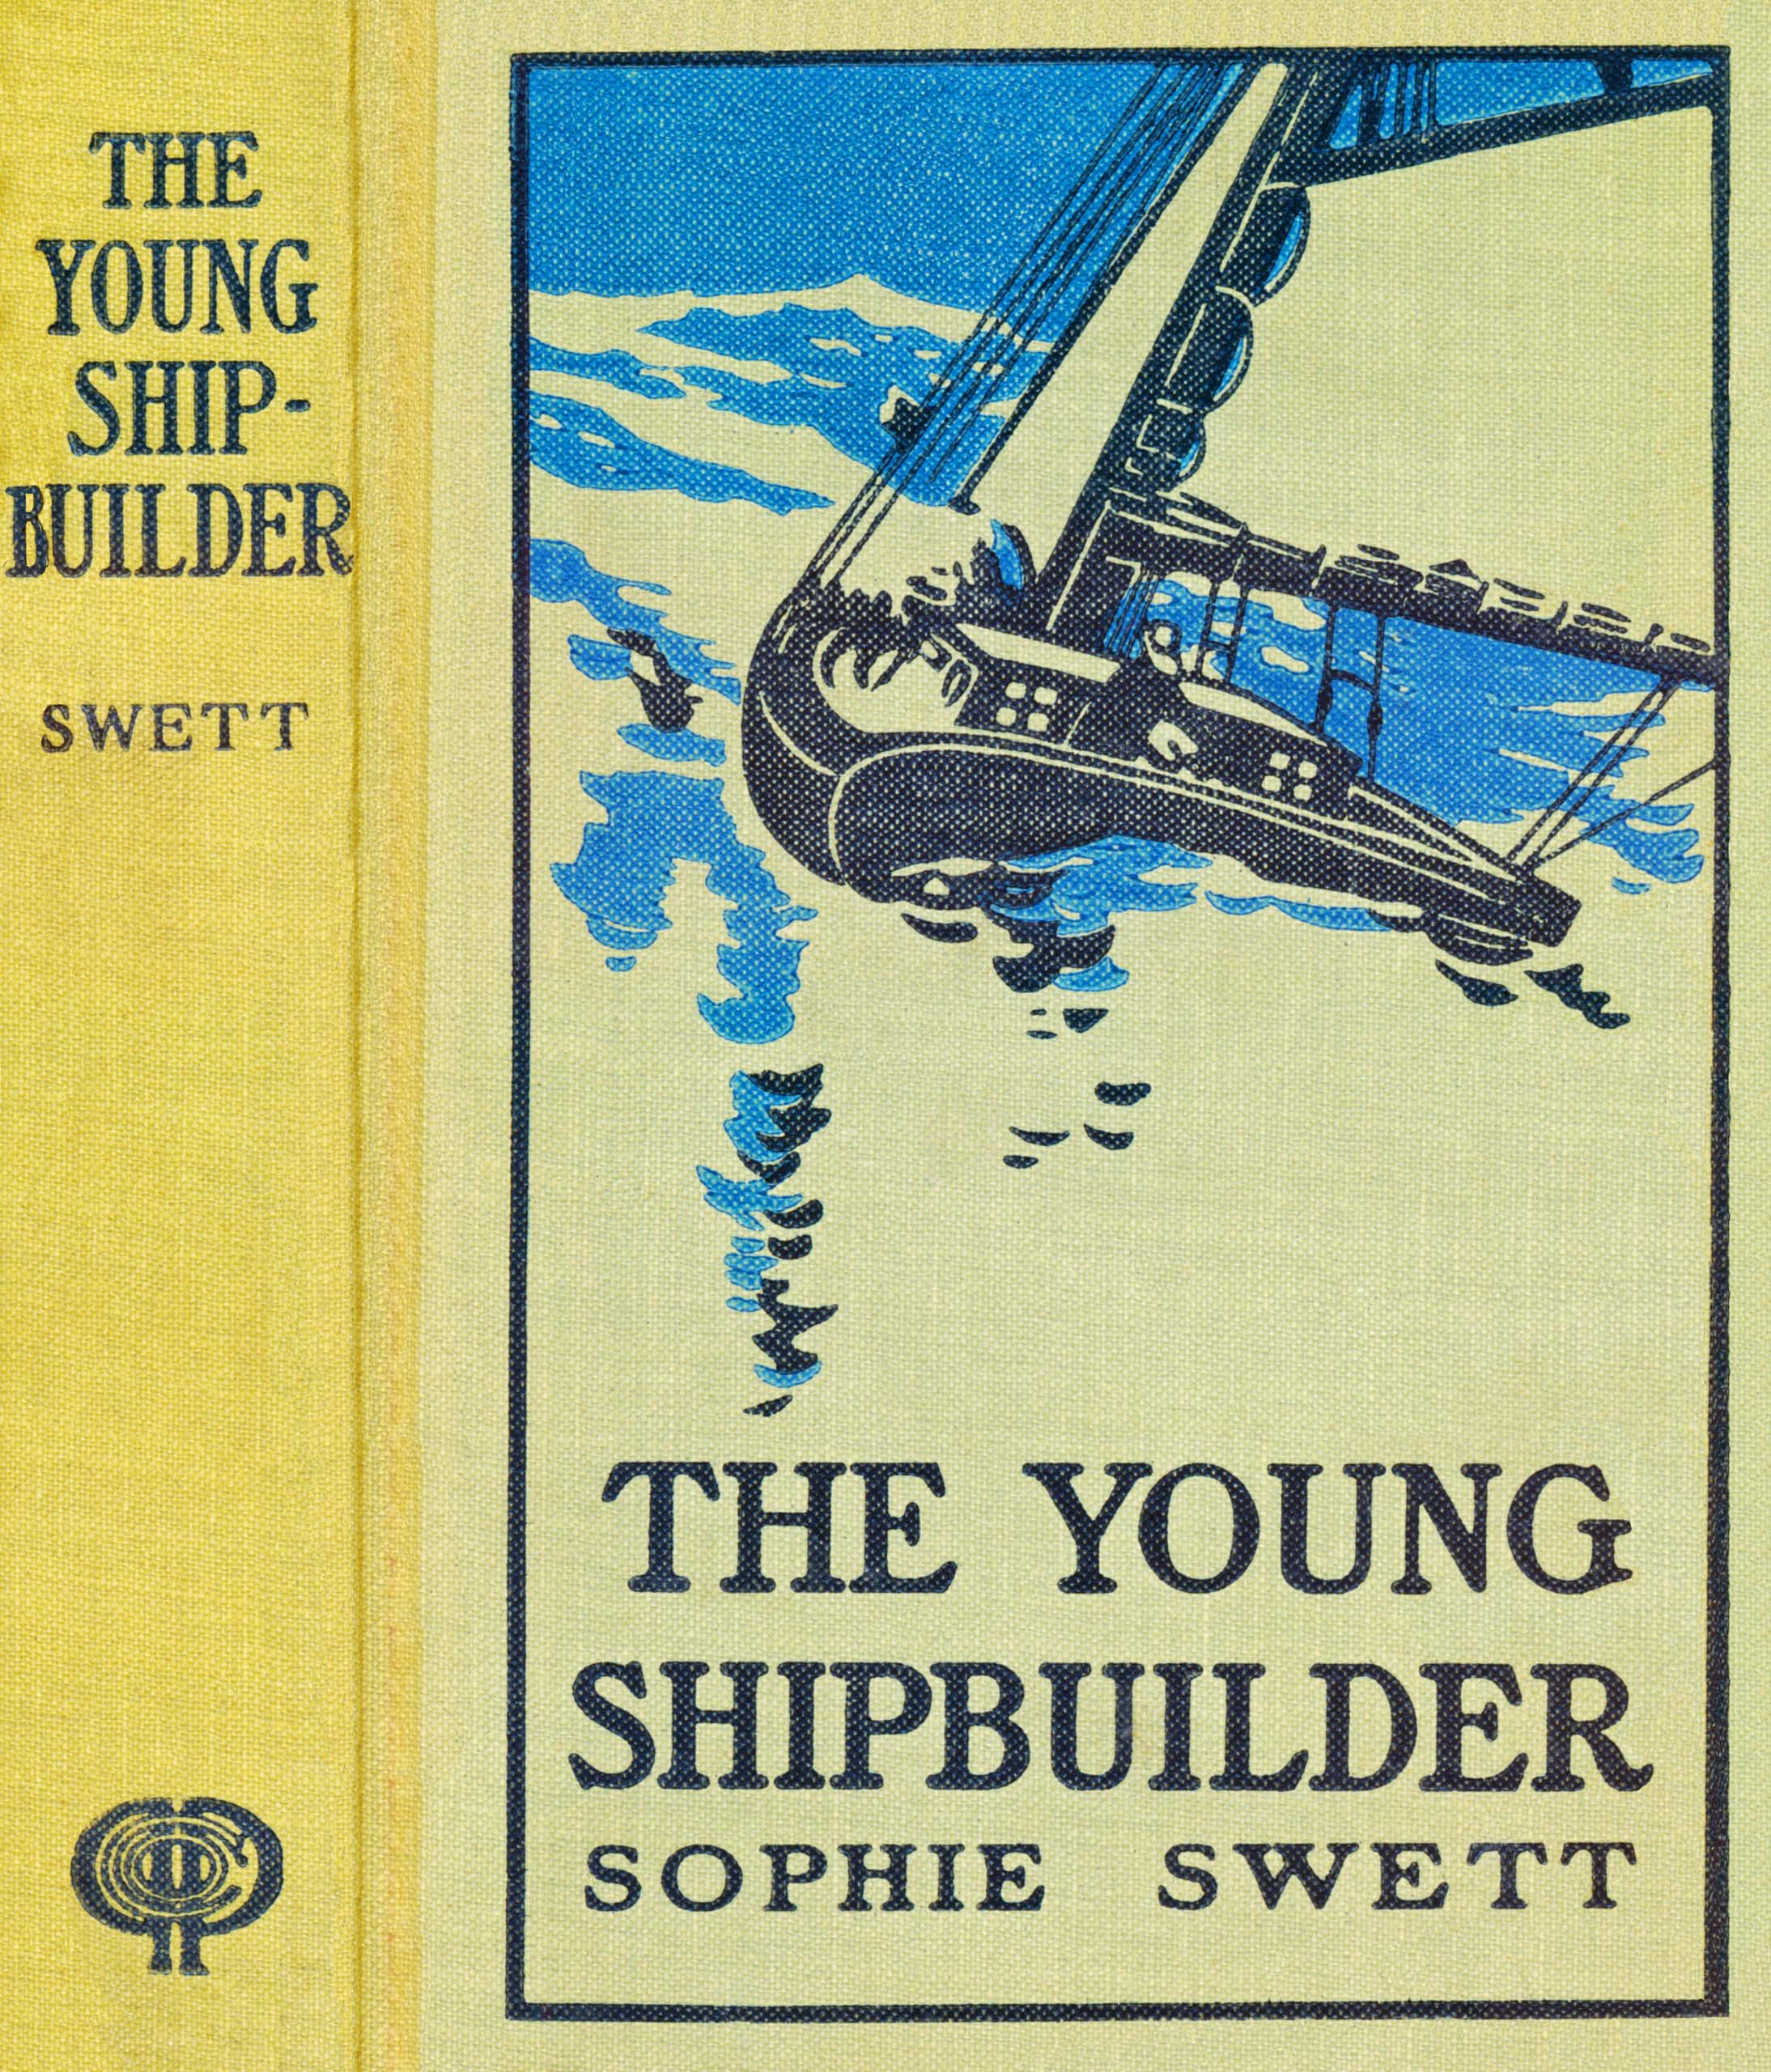 The young ship builder